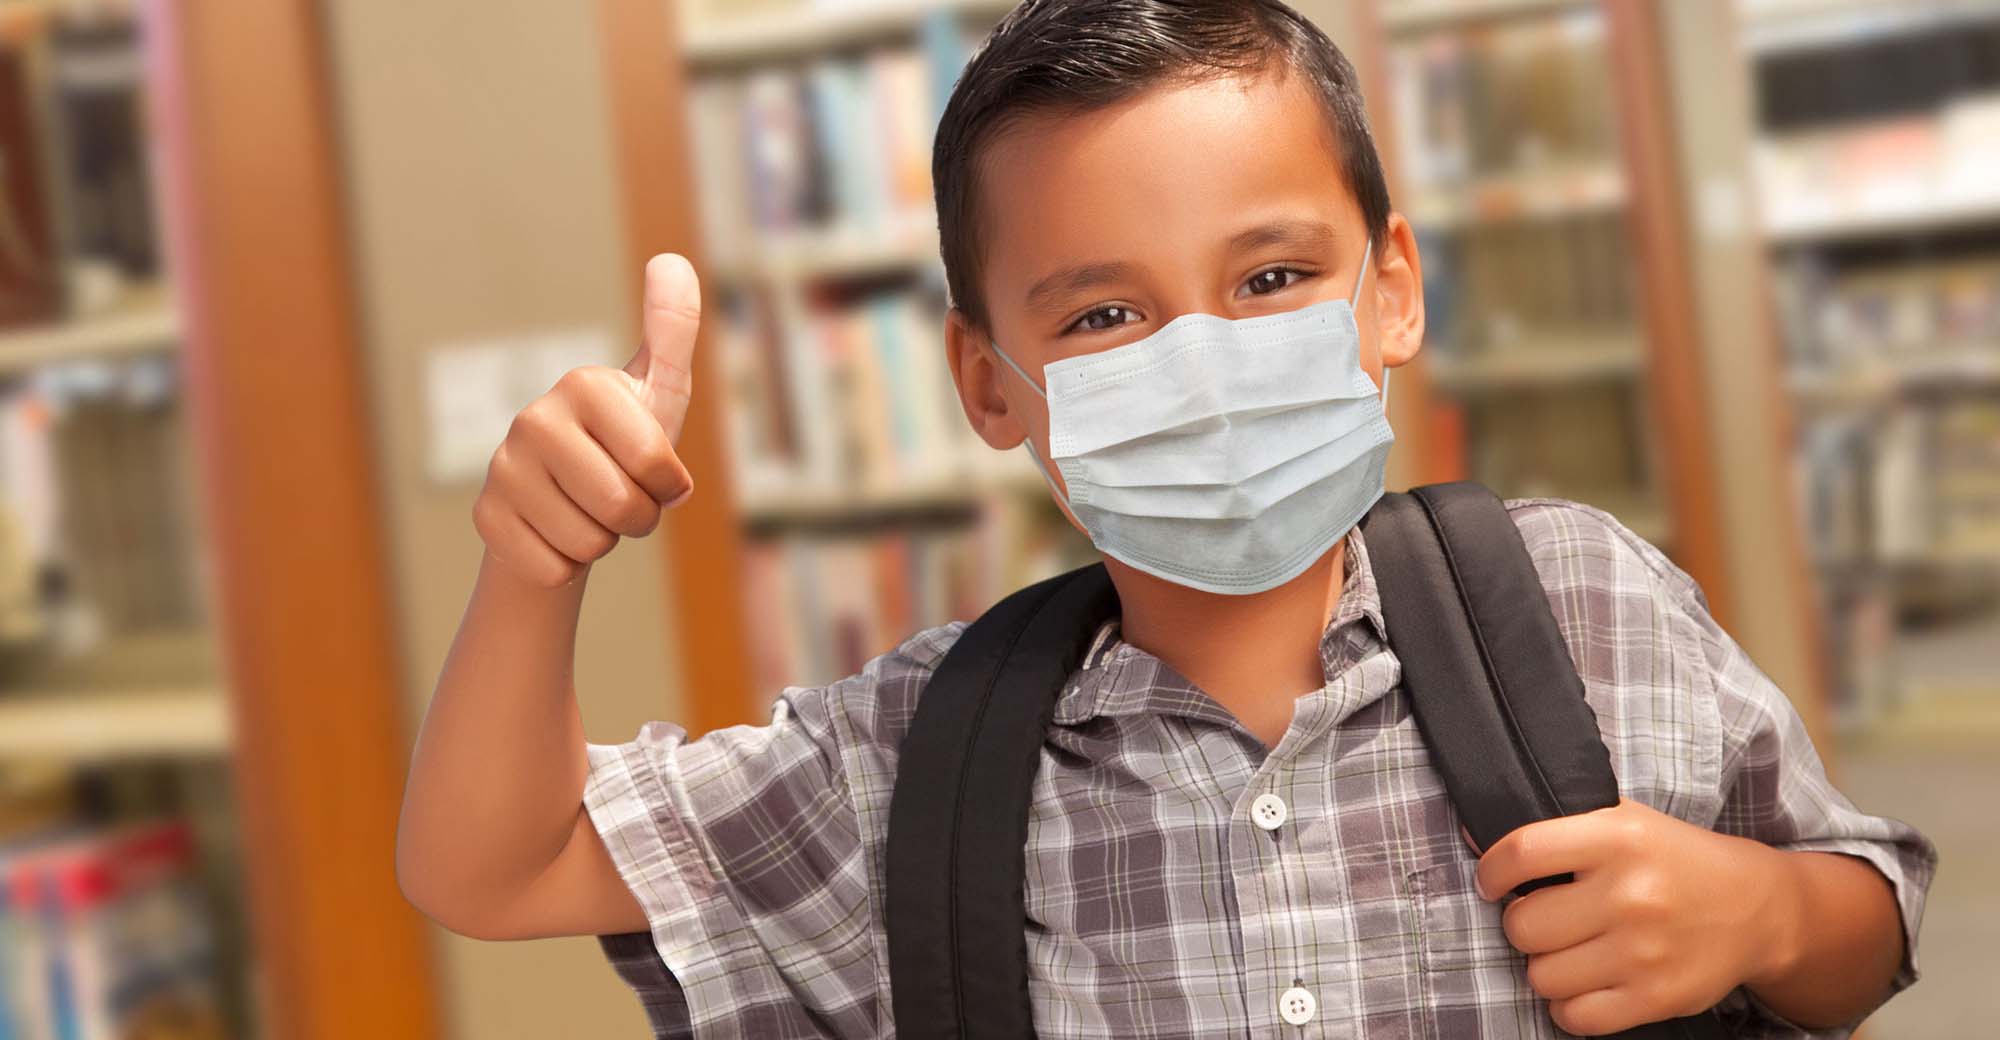 A Hispanic boy wears a medical face mask and looks toward the camera holding his thumb up.